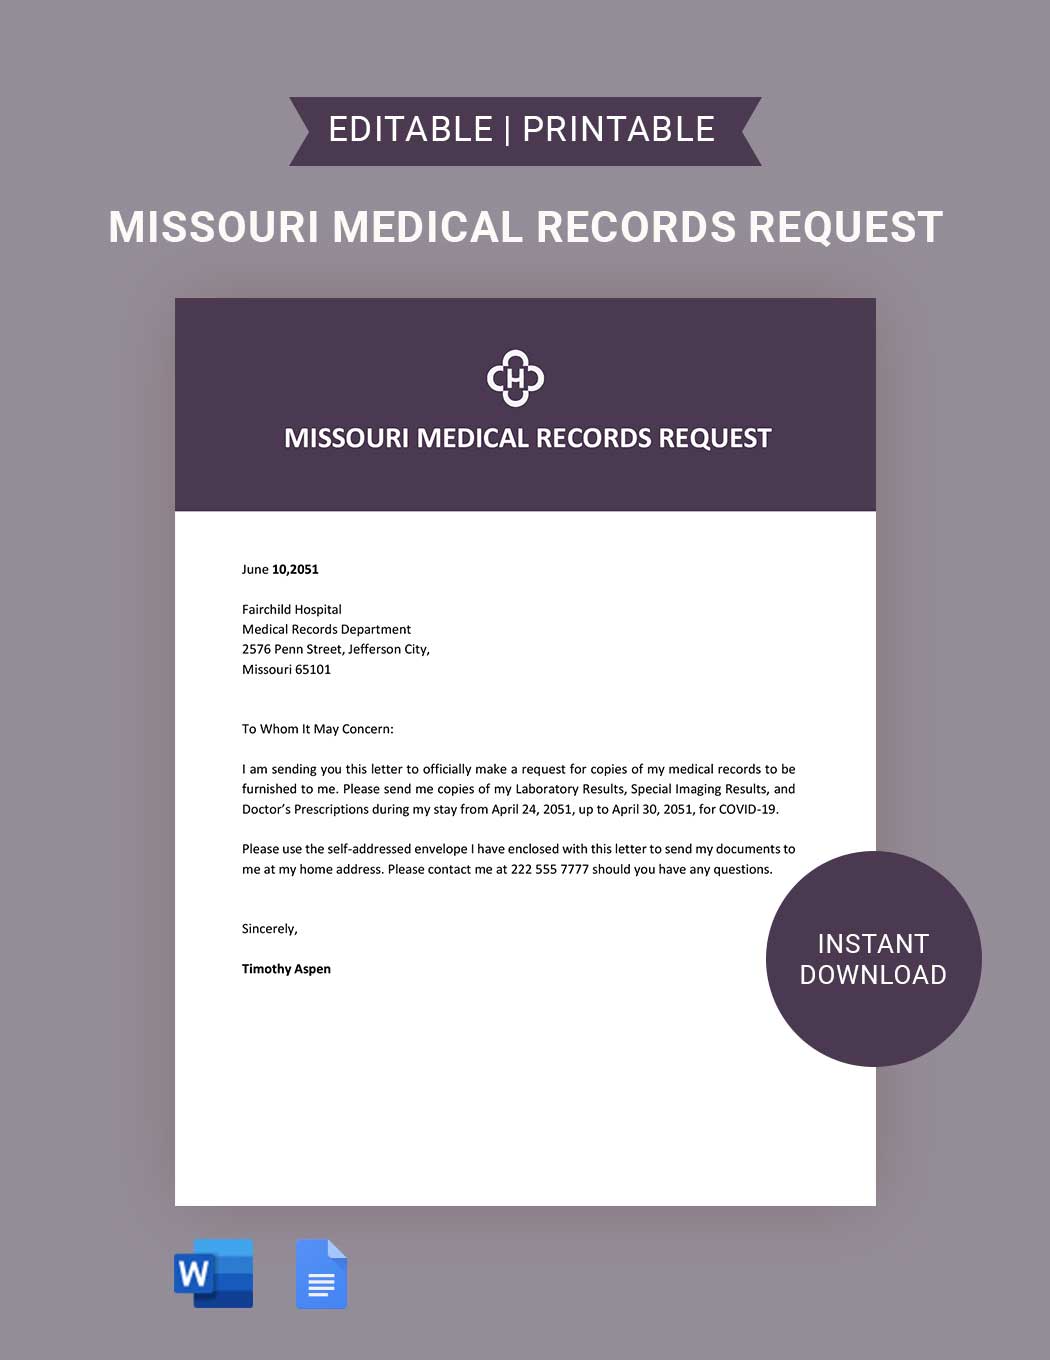 Missouri Medical Records Request Template in Word, Google Docs